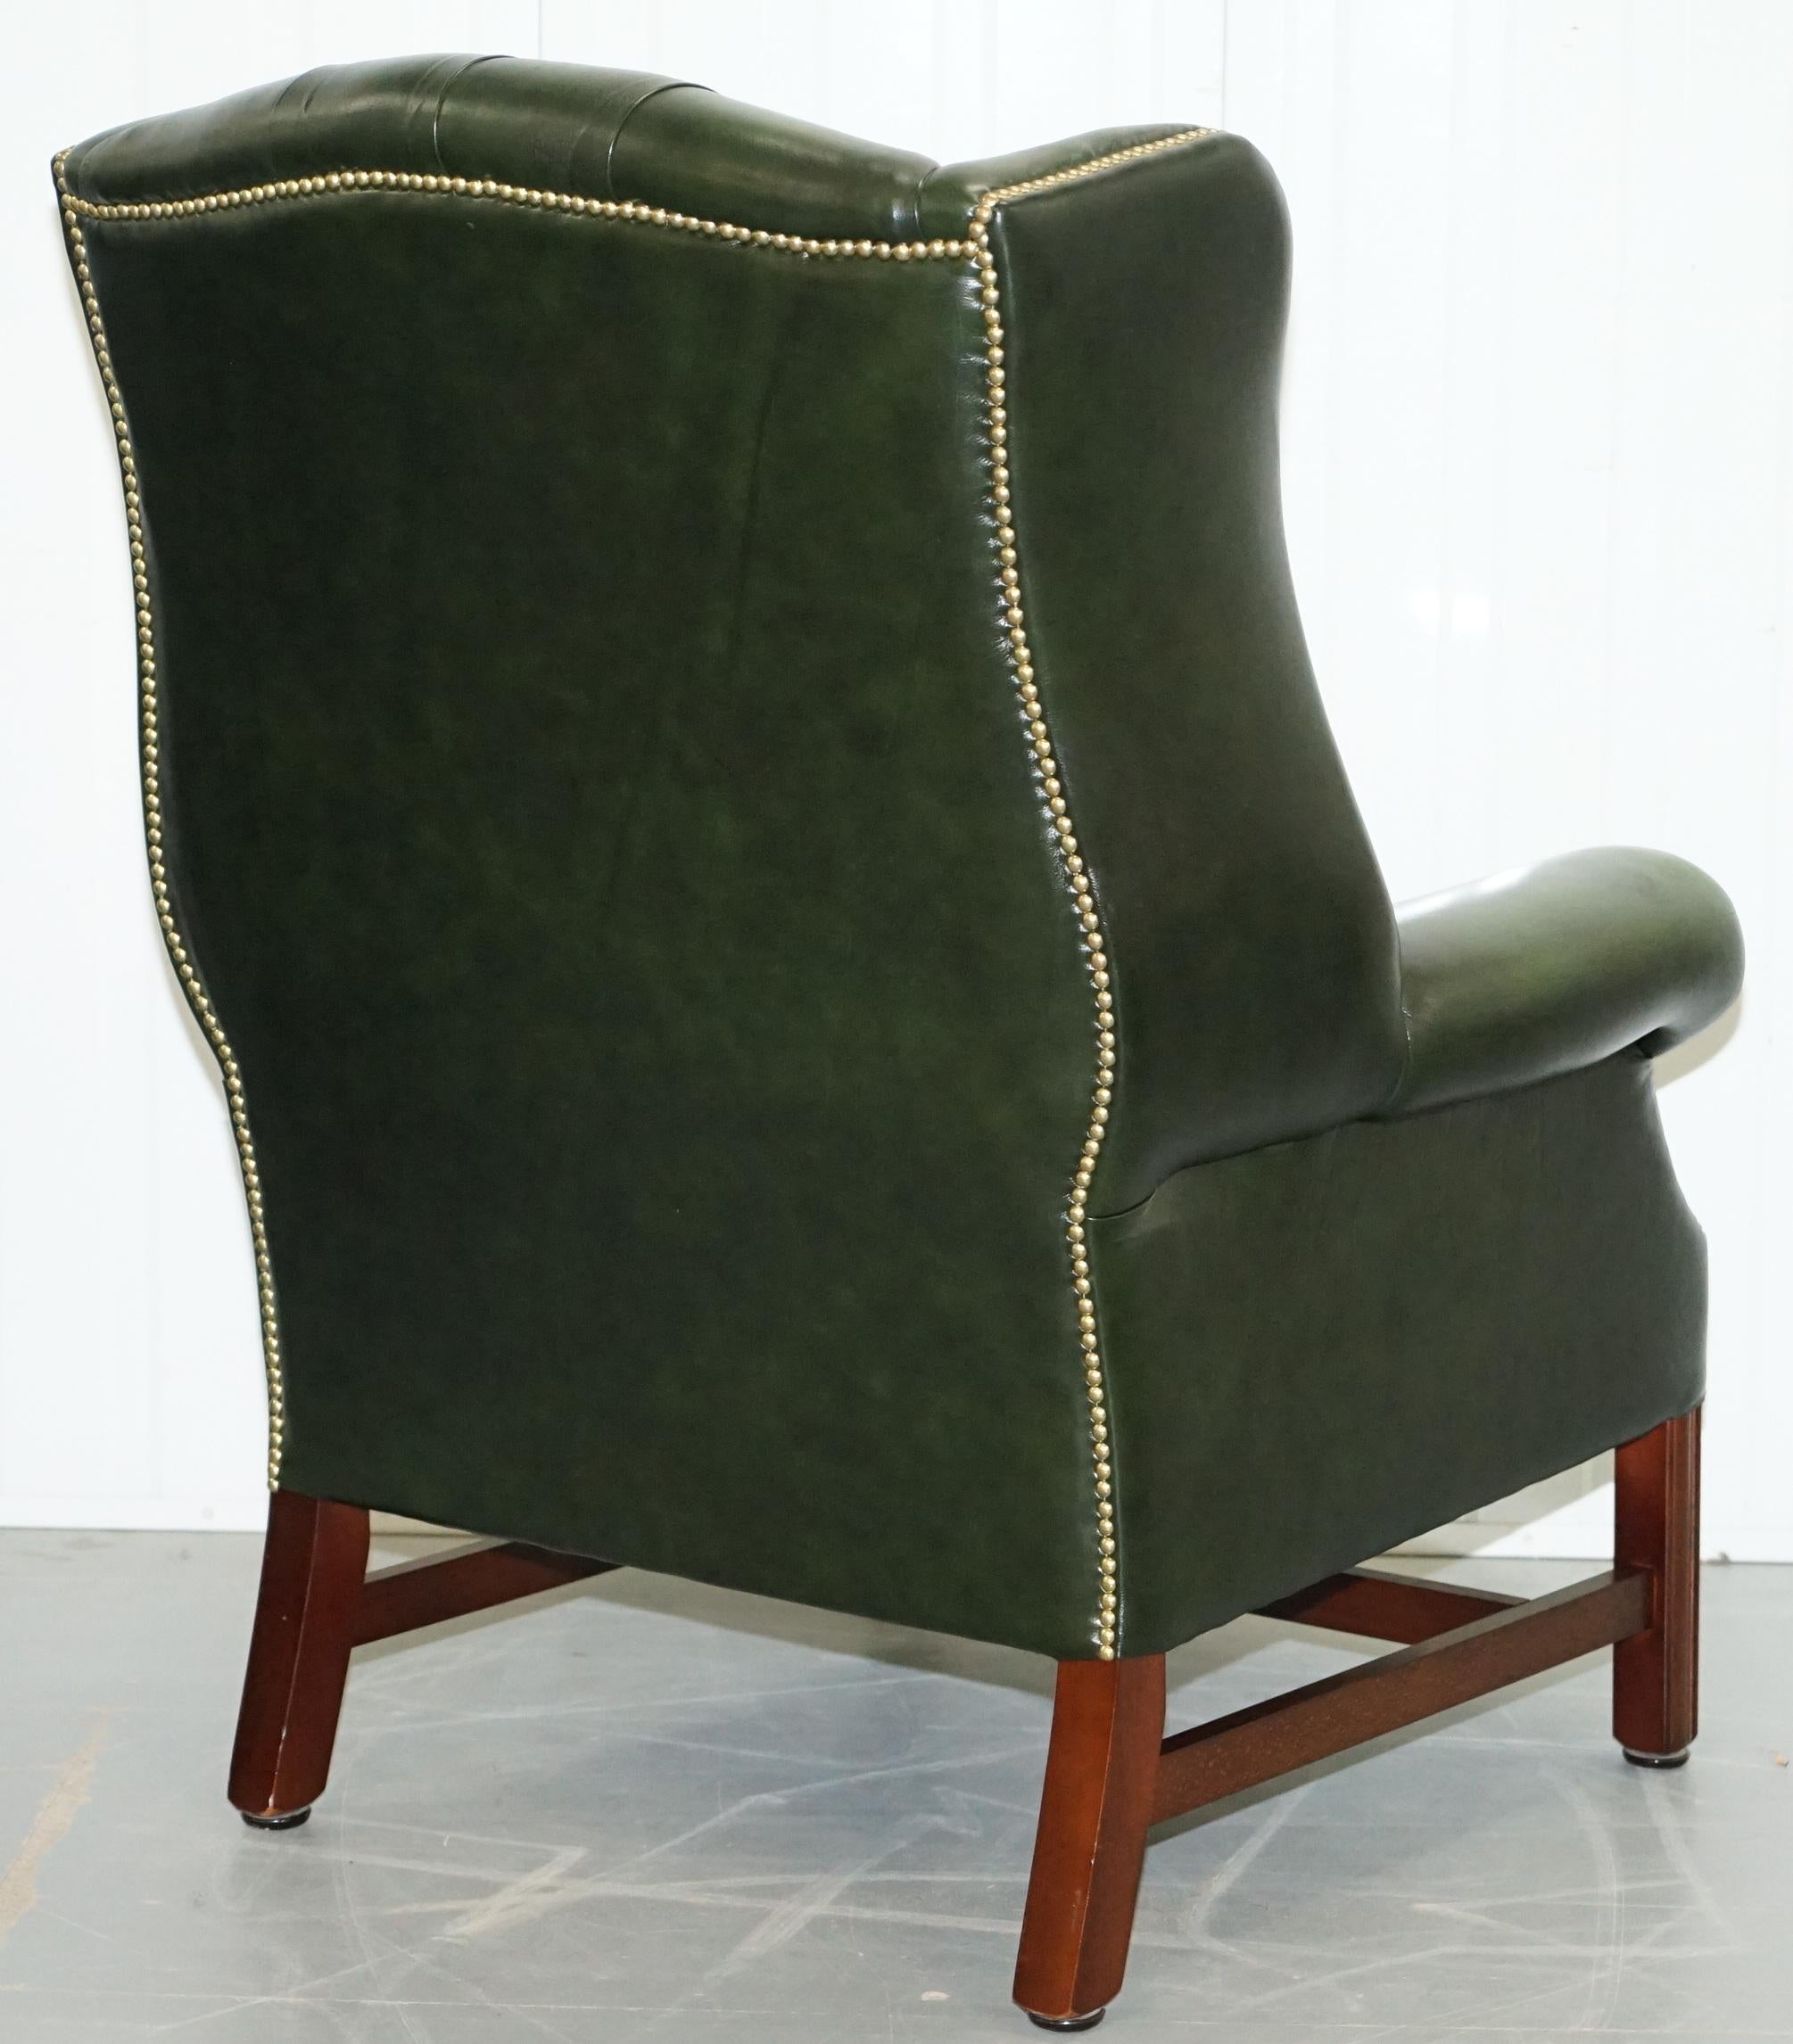 Hand-Crafted Large Pair of Luxury Green Leather Chesterfield Wingback Armchairs & Footstool